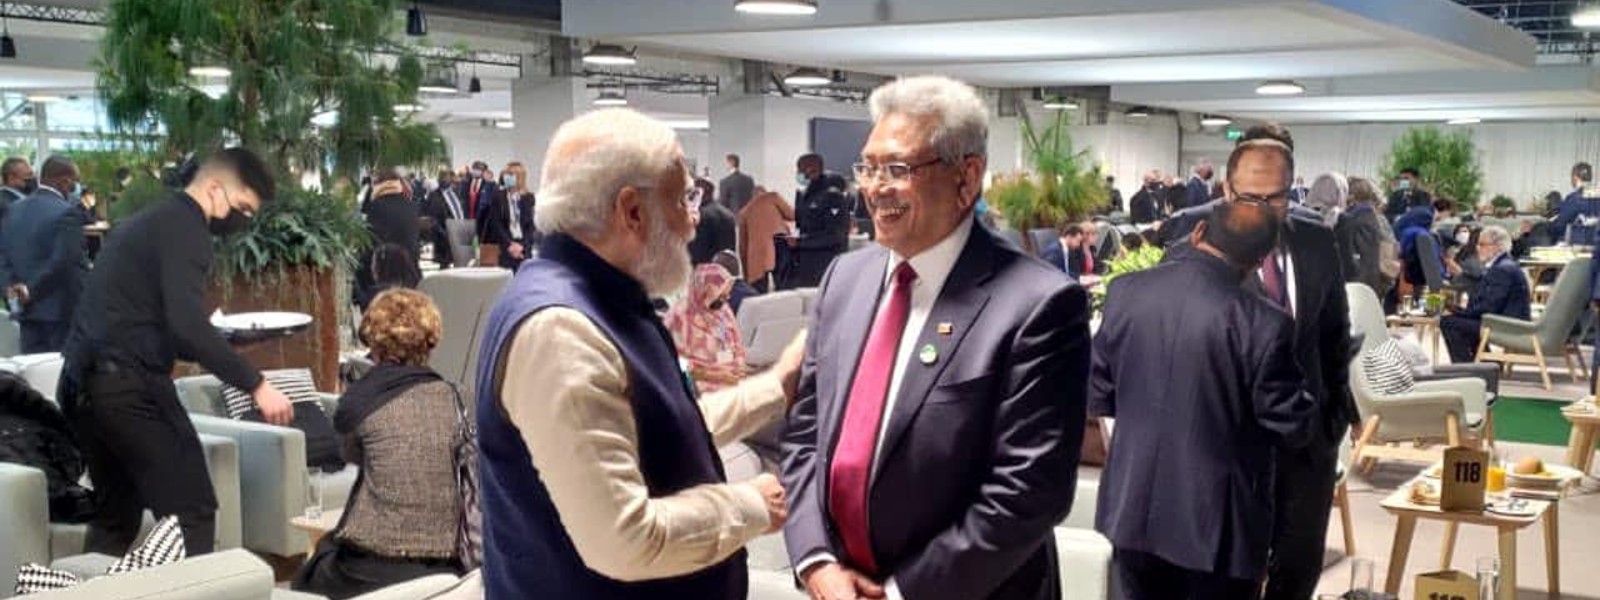 President meets Modi during COP26 in Glasgow